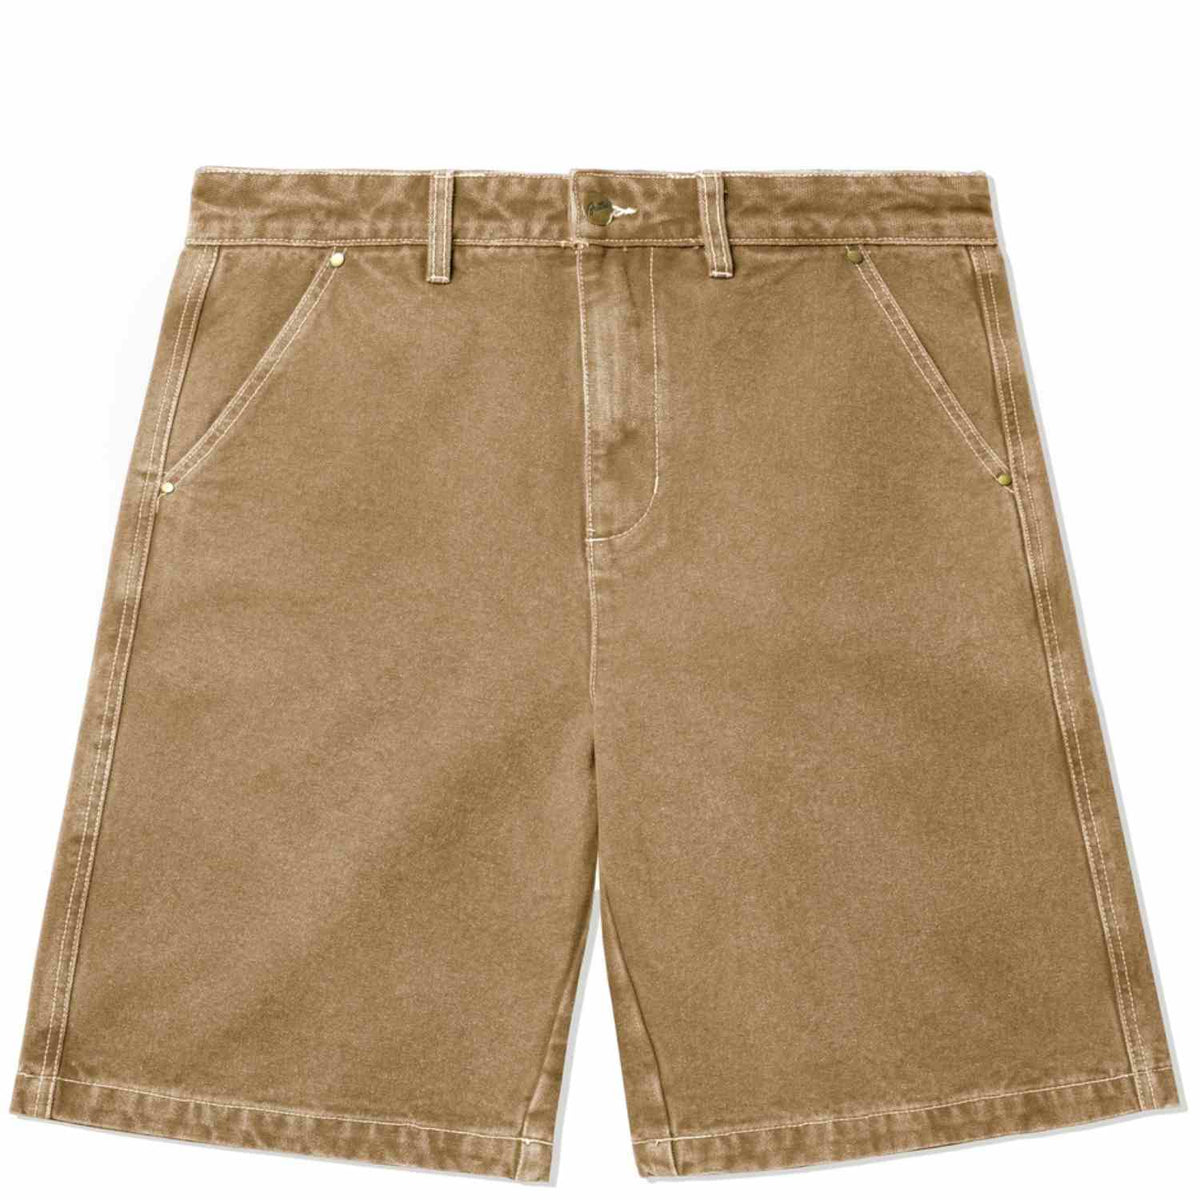 Butter Goods Work Shorts - Washed Brown